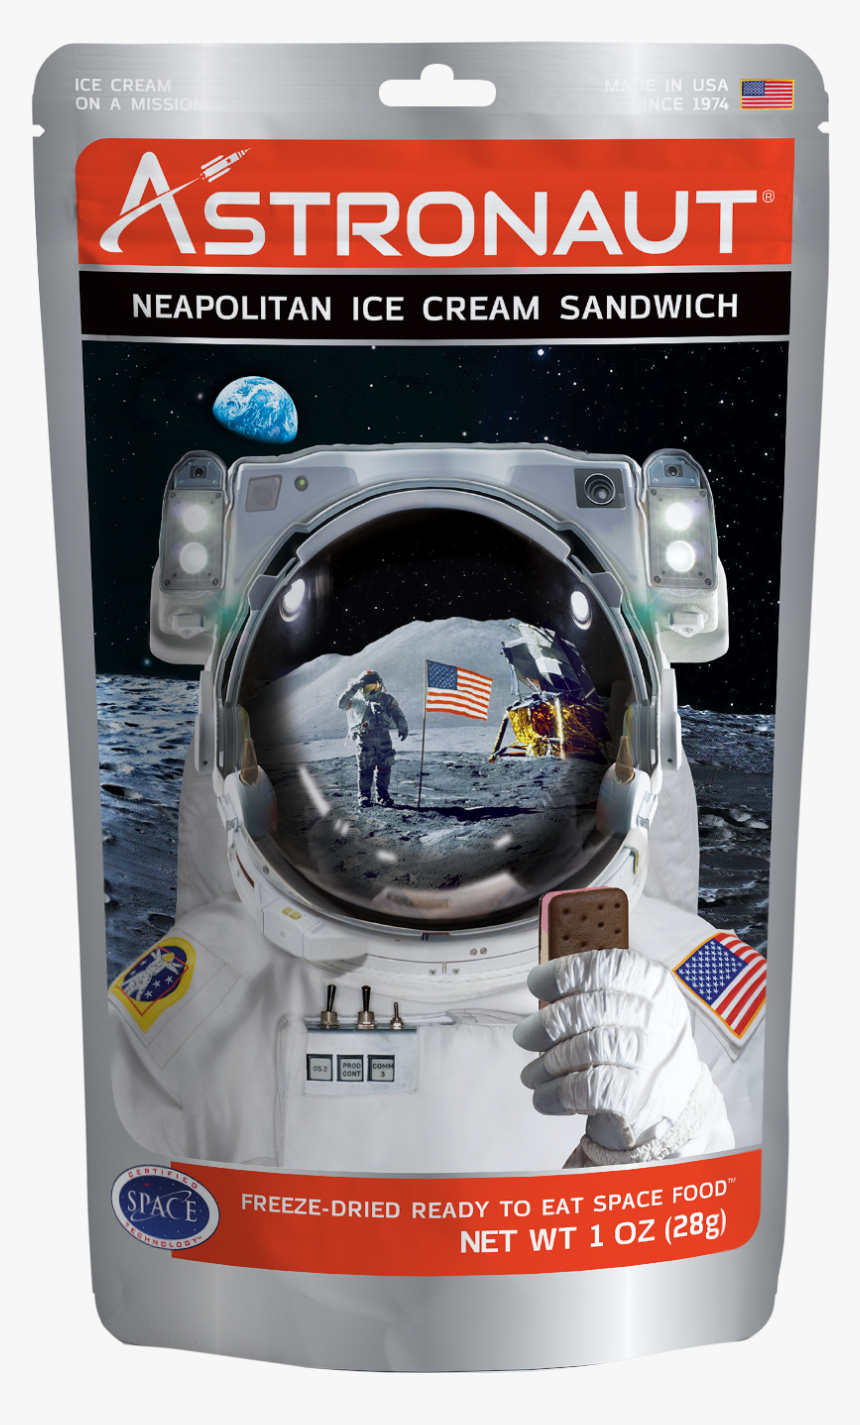 Astronaut Freeze Dried Ice Cream Sandwich Neapolitan - Astronaut Ice Cream Package, HD Png Download, Free Download